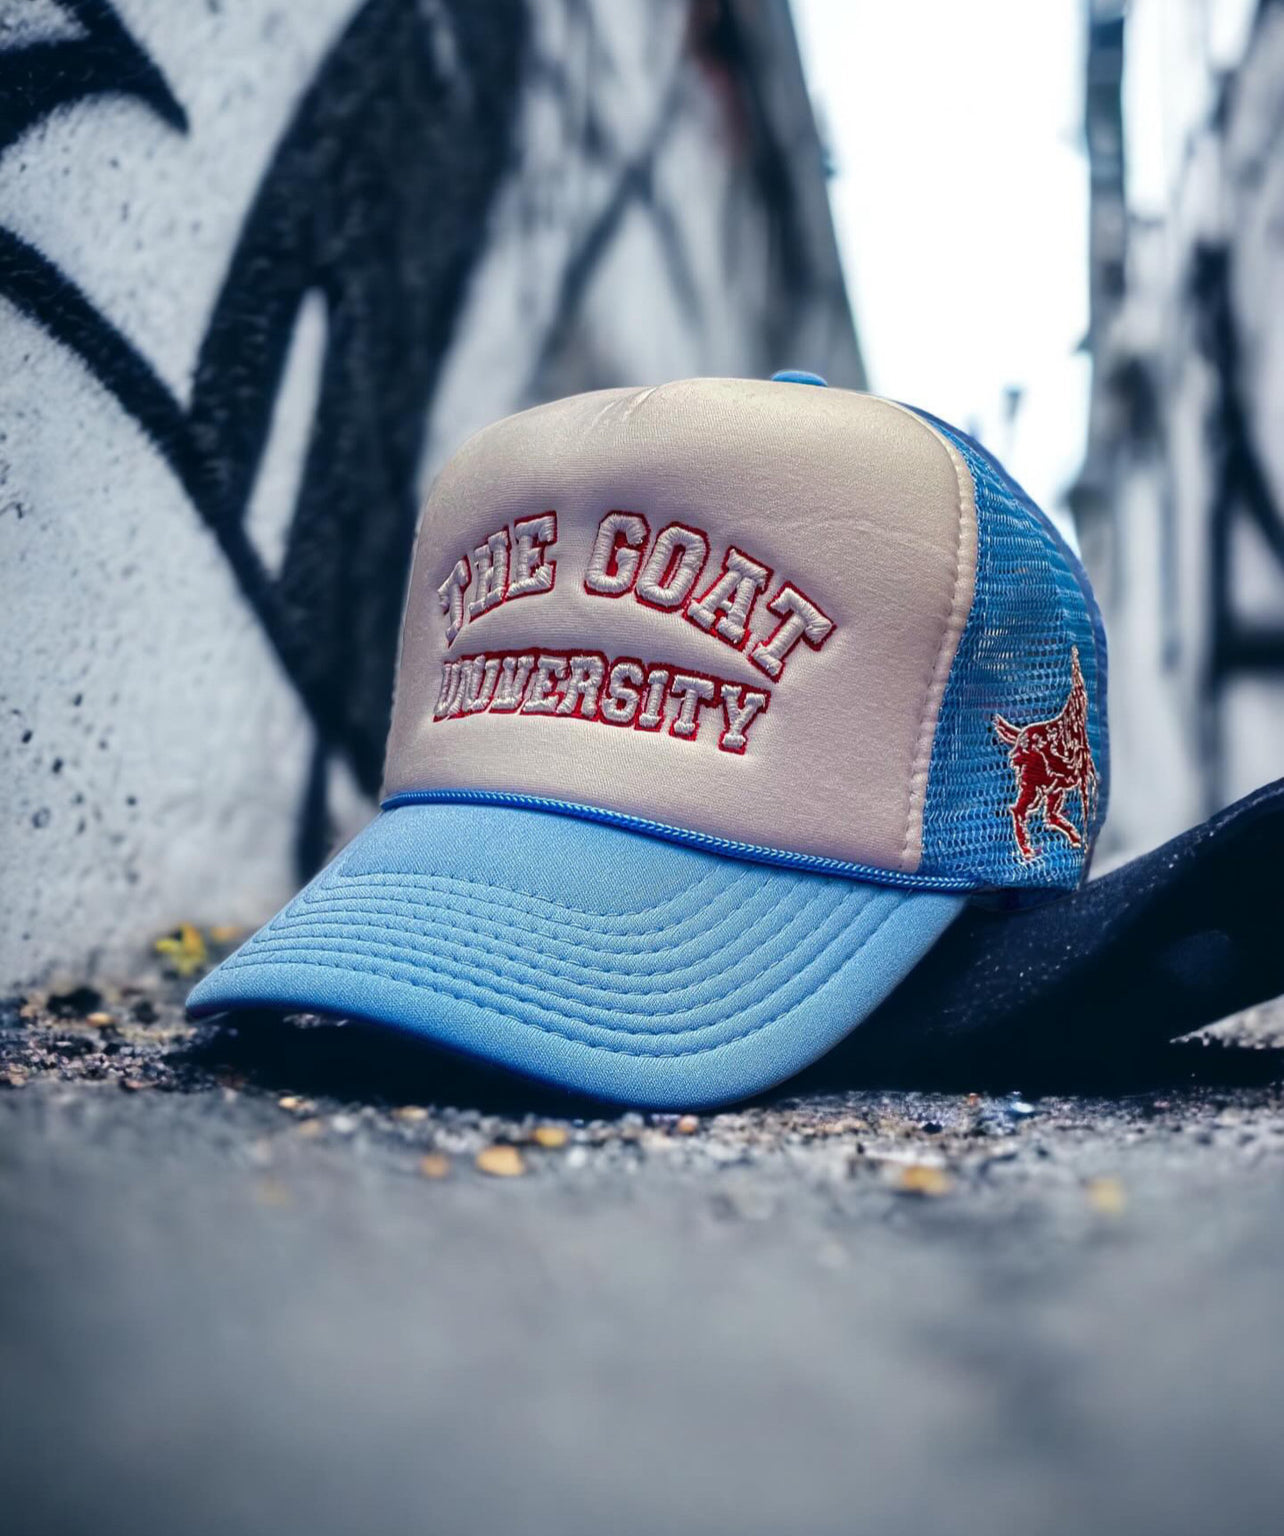 “THE GOAT UNIVERSITY” BLUE/WHITE/RED 3D EMBROIDERY TRUCKER HAT